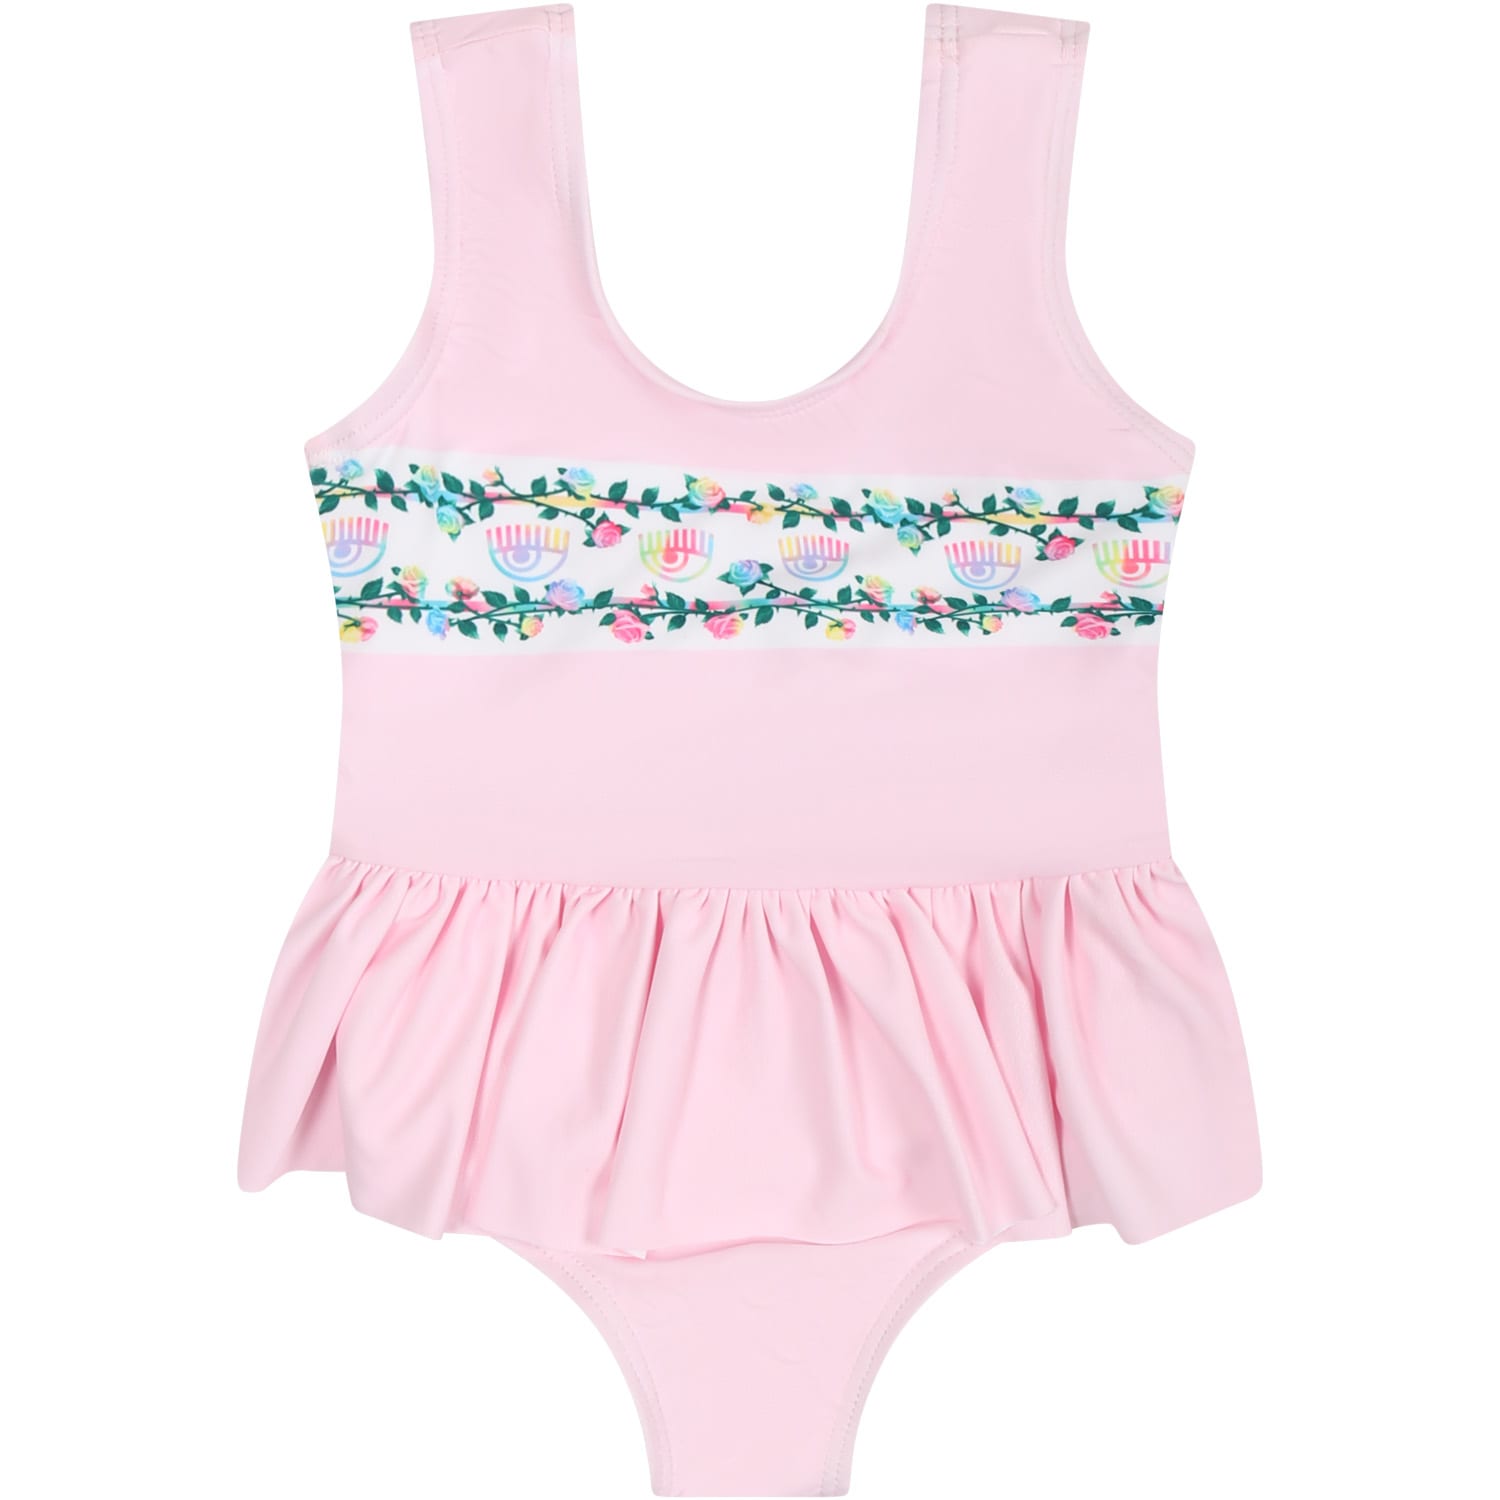 Chiara Ferragni Pink Swimsuit For Baby Girl With Ruffles And Flowers